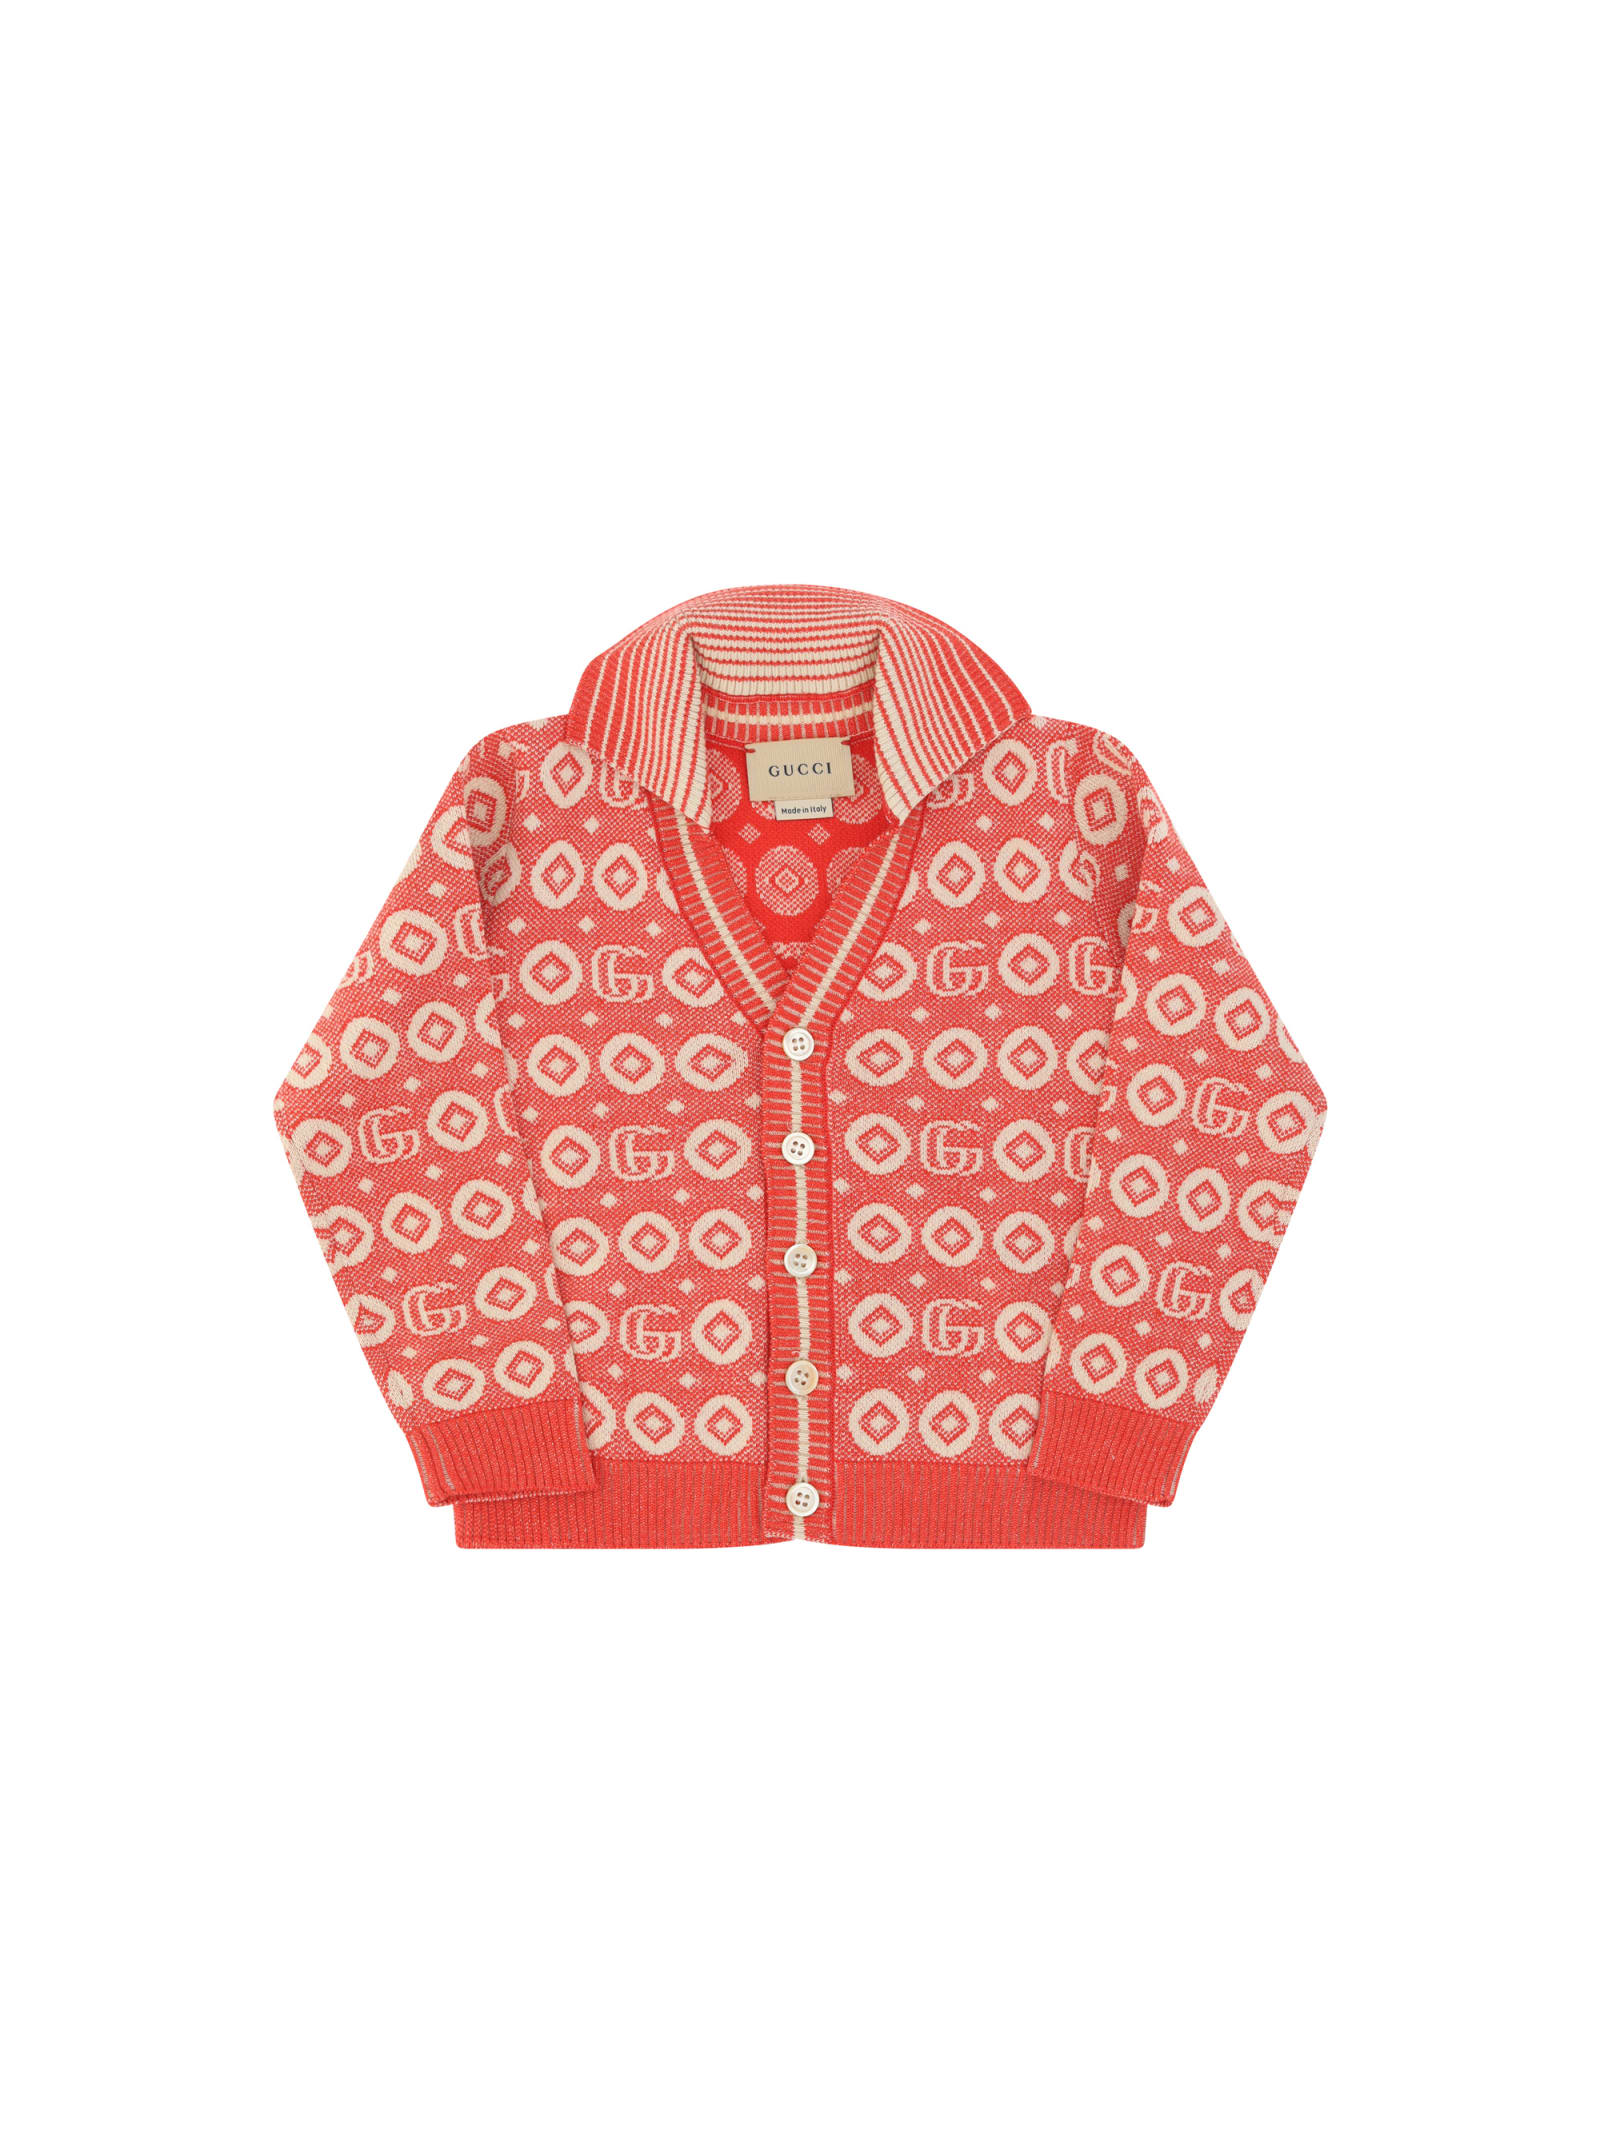 Gucci Kids' Cardigan For Boy In Red/beige